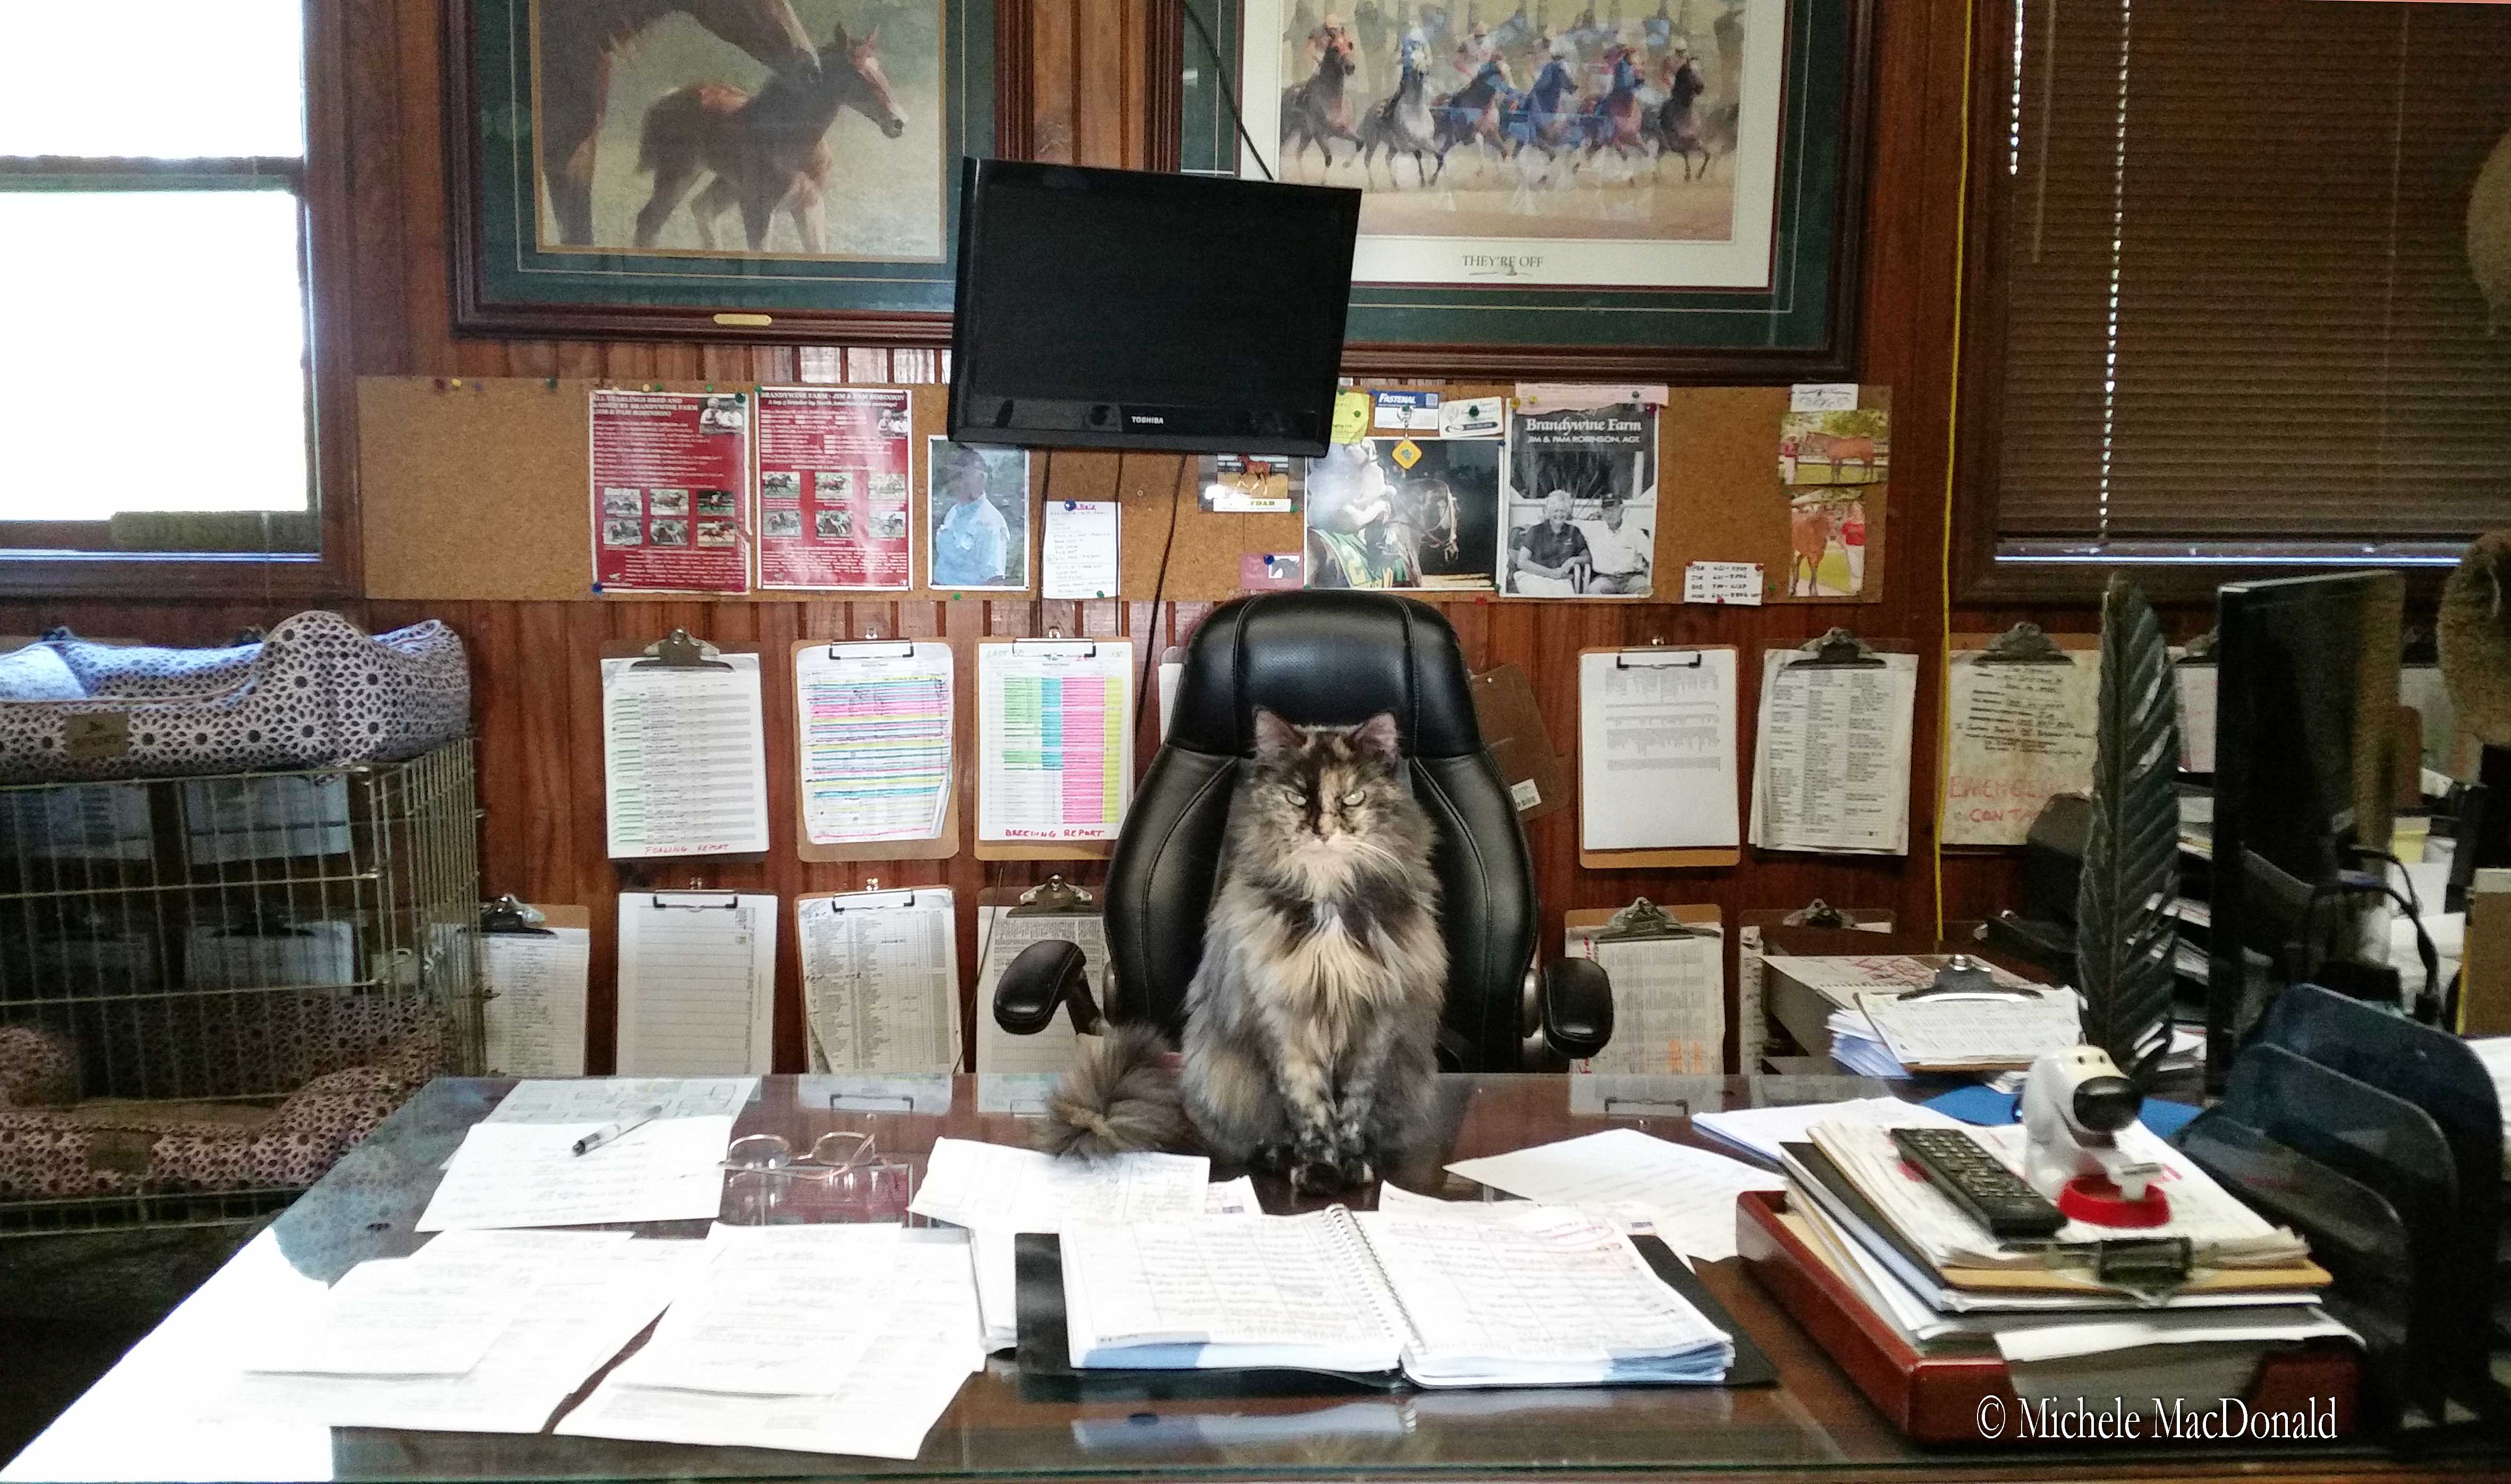 Jasmine the calico cat likes to sit regally amid the breeding reports piled on Pam Robinson’s desk. Photo: Michele MacDonald